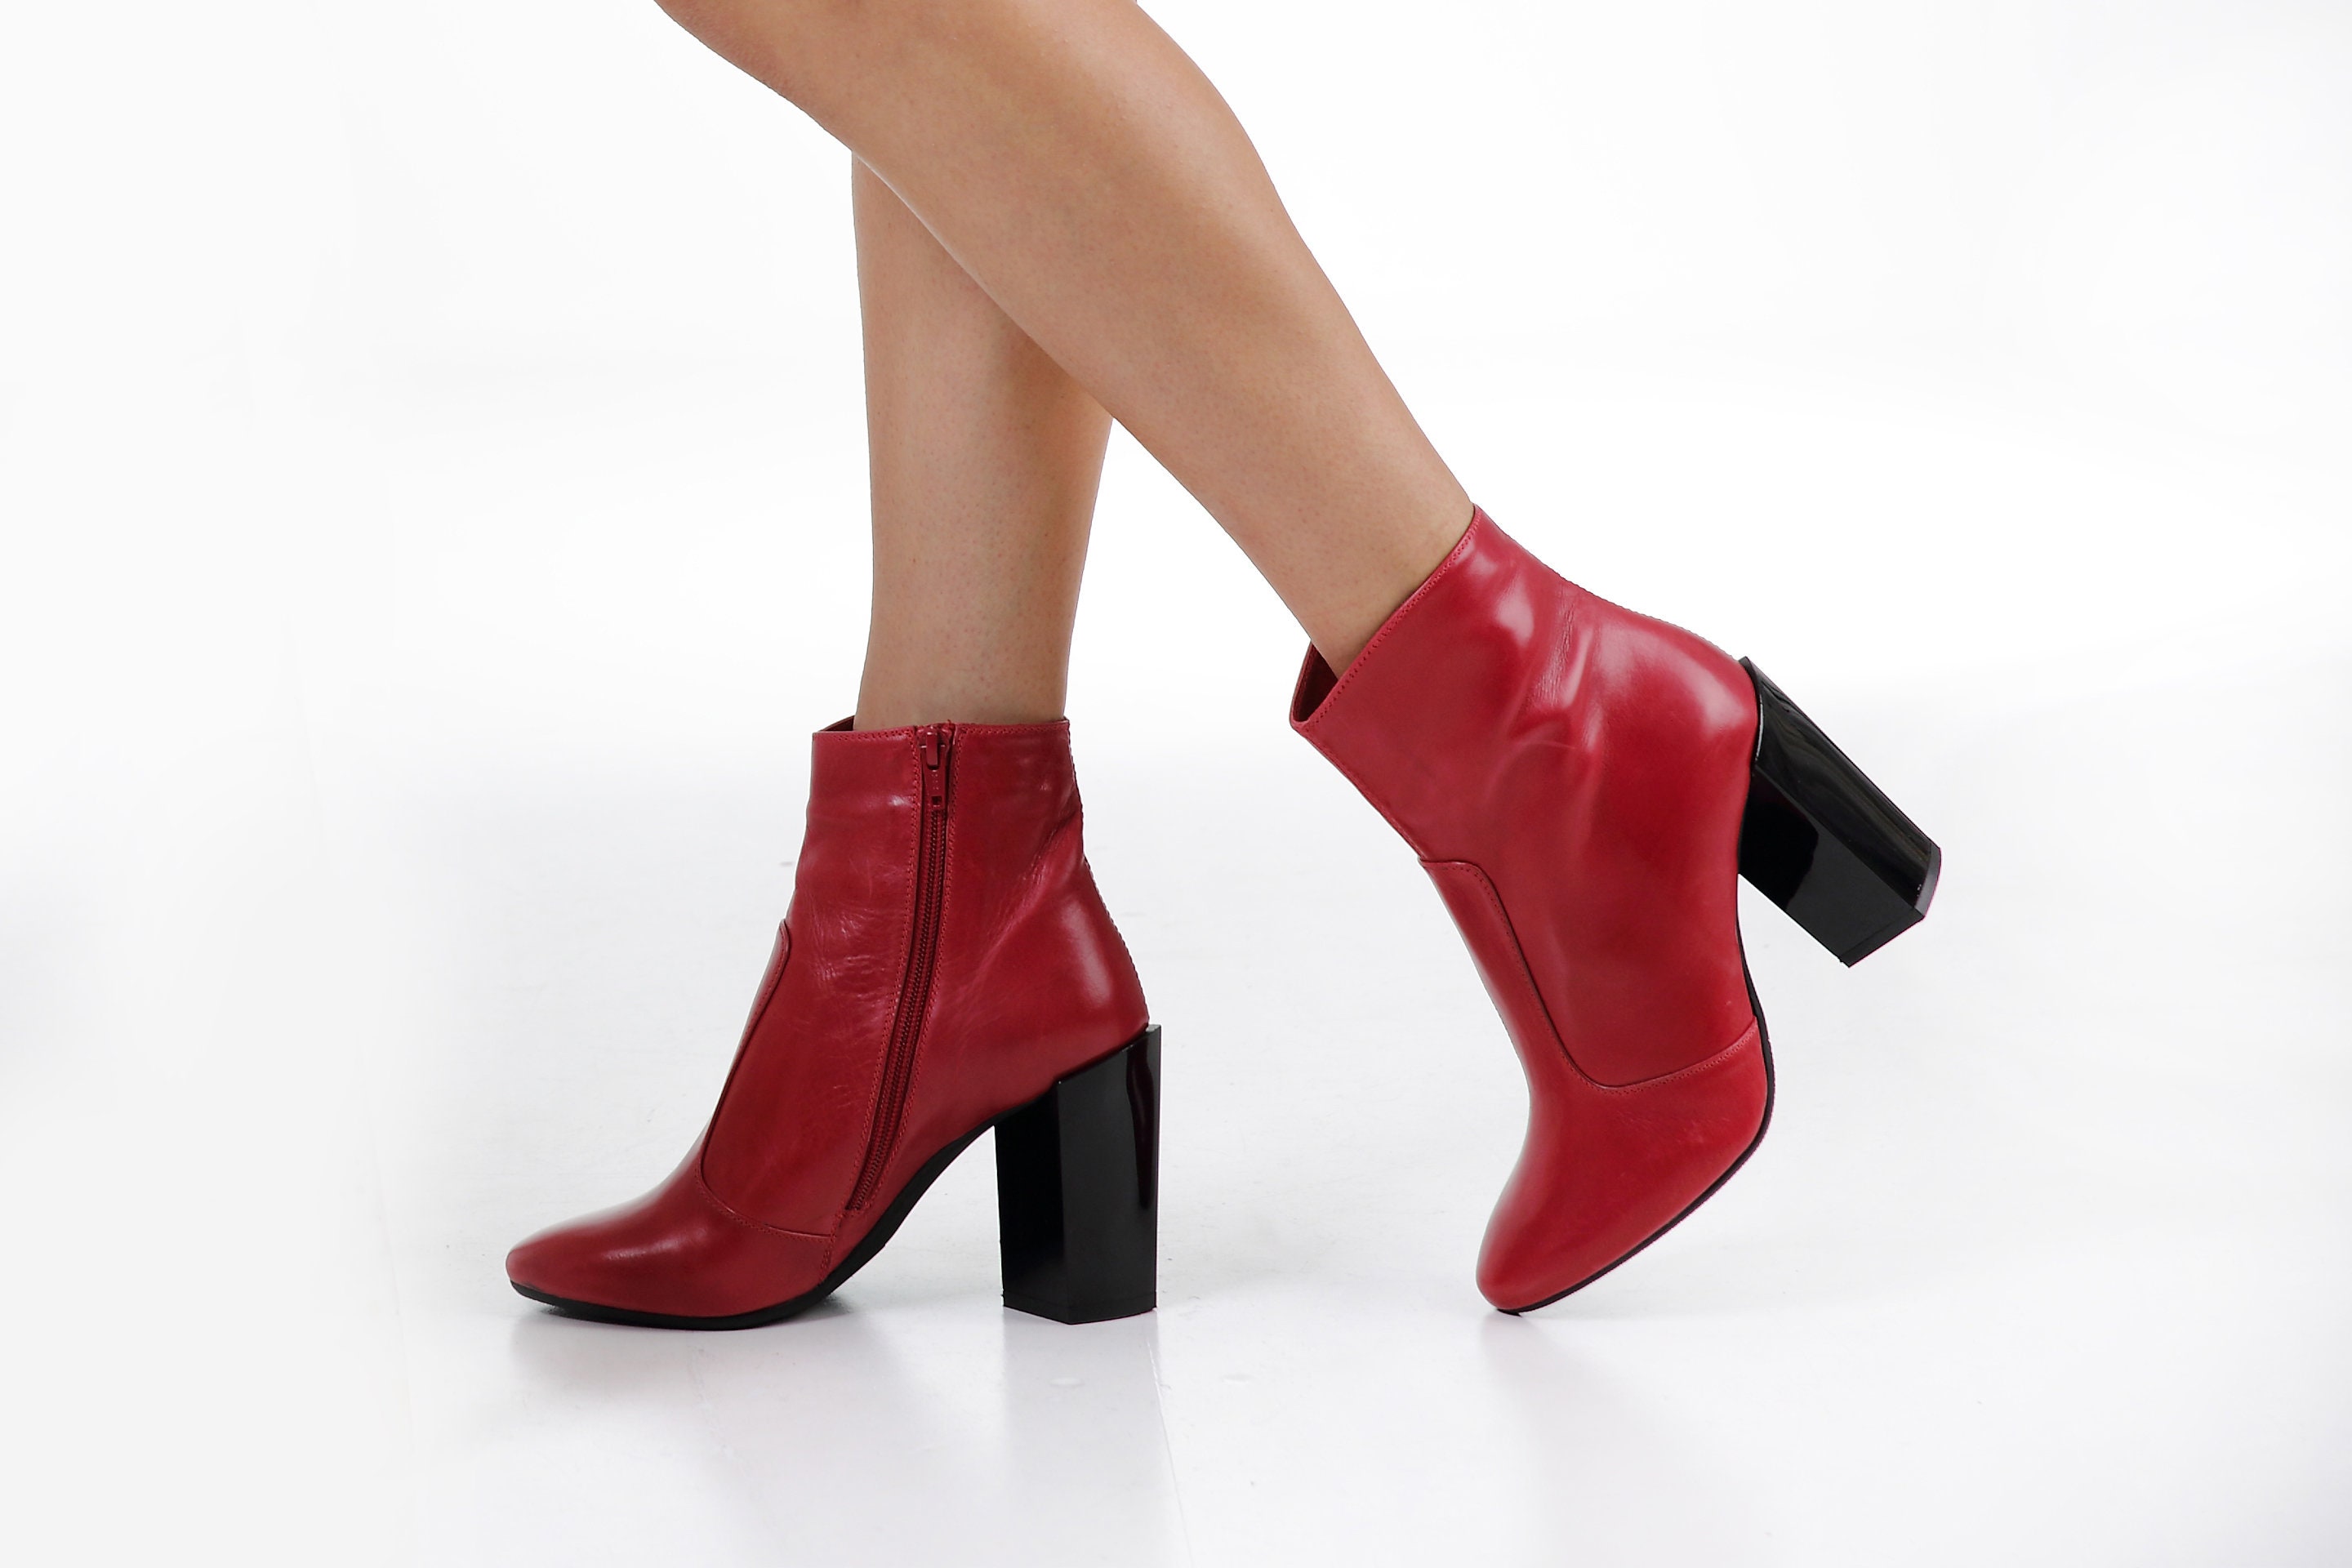 LADIES SHOES/FOOTWEAR Borelli April ankle boot red